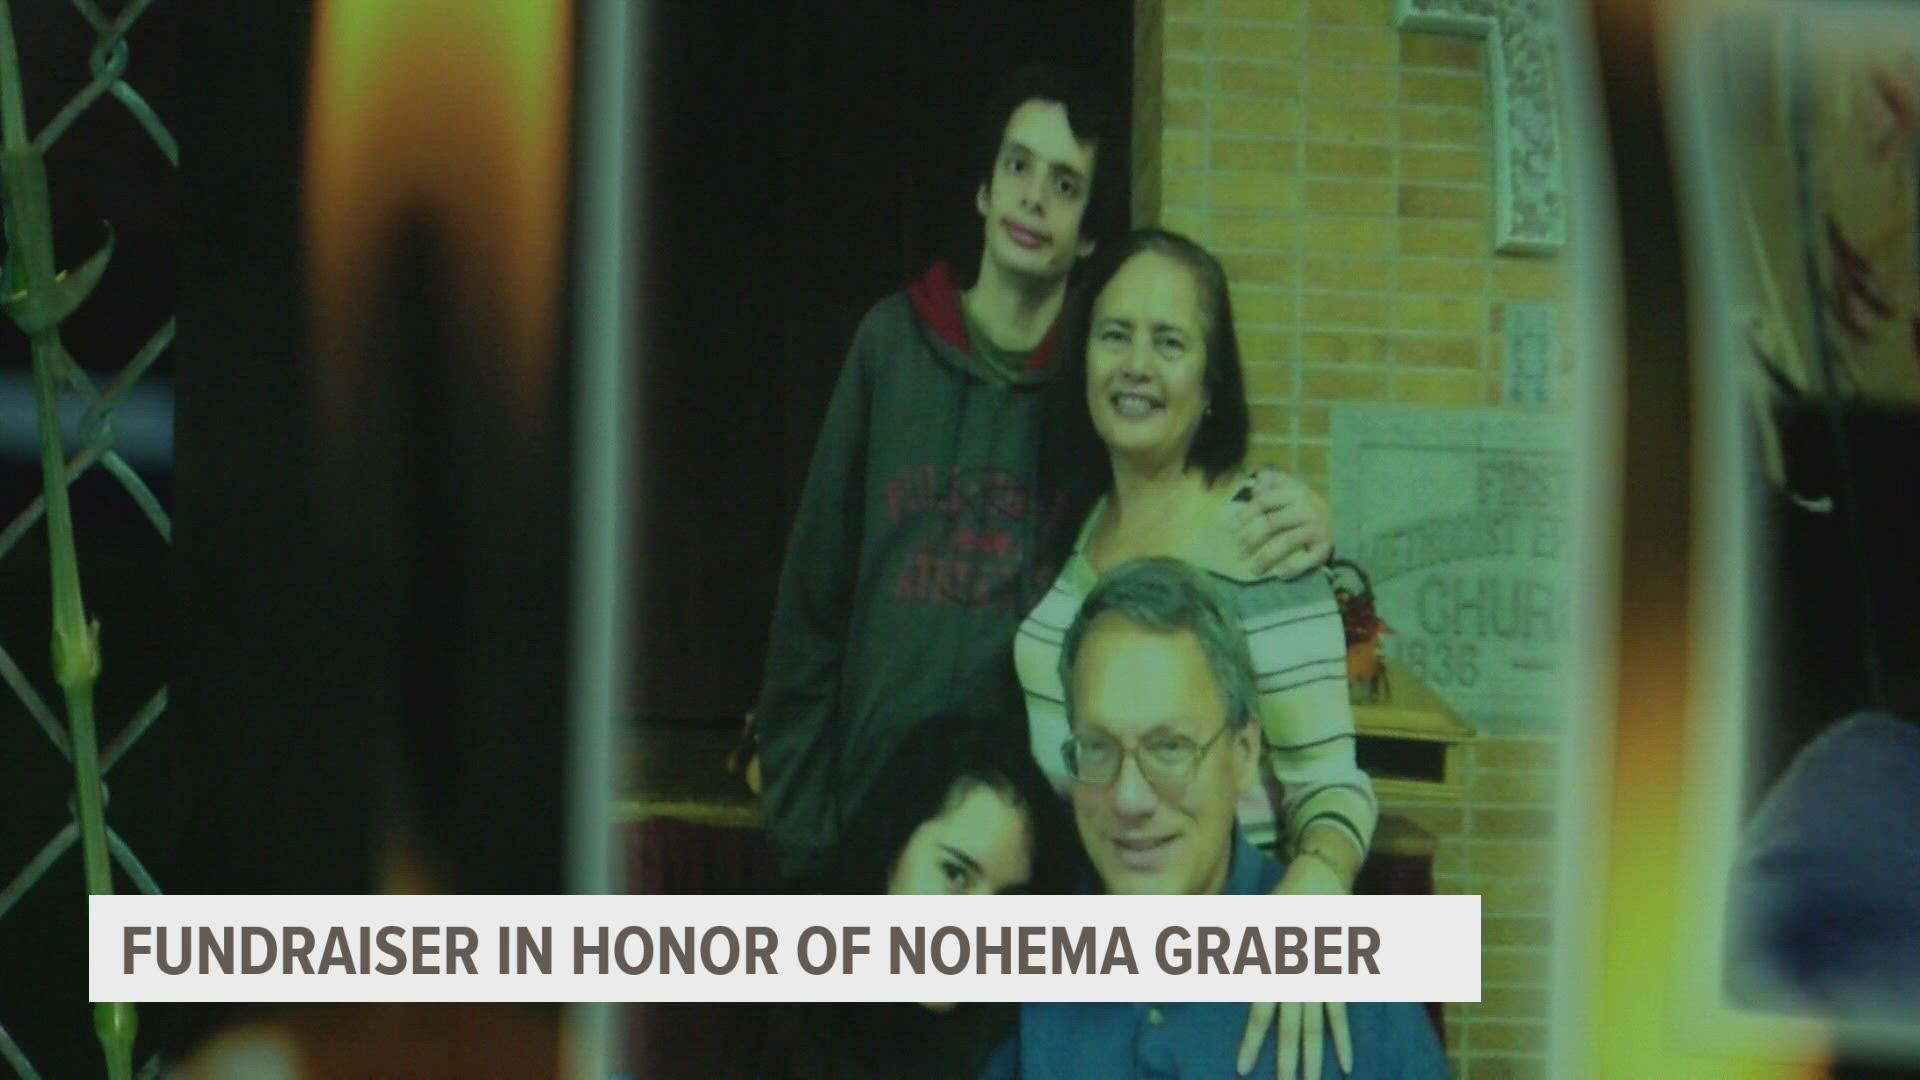 The community is raising money for the Spanish teacher's family. Nohema Graber's body was found under a tarp in a local park just over a week ago.